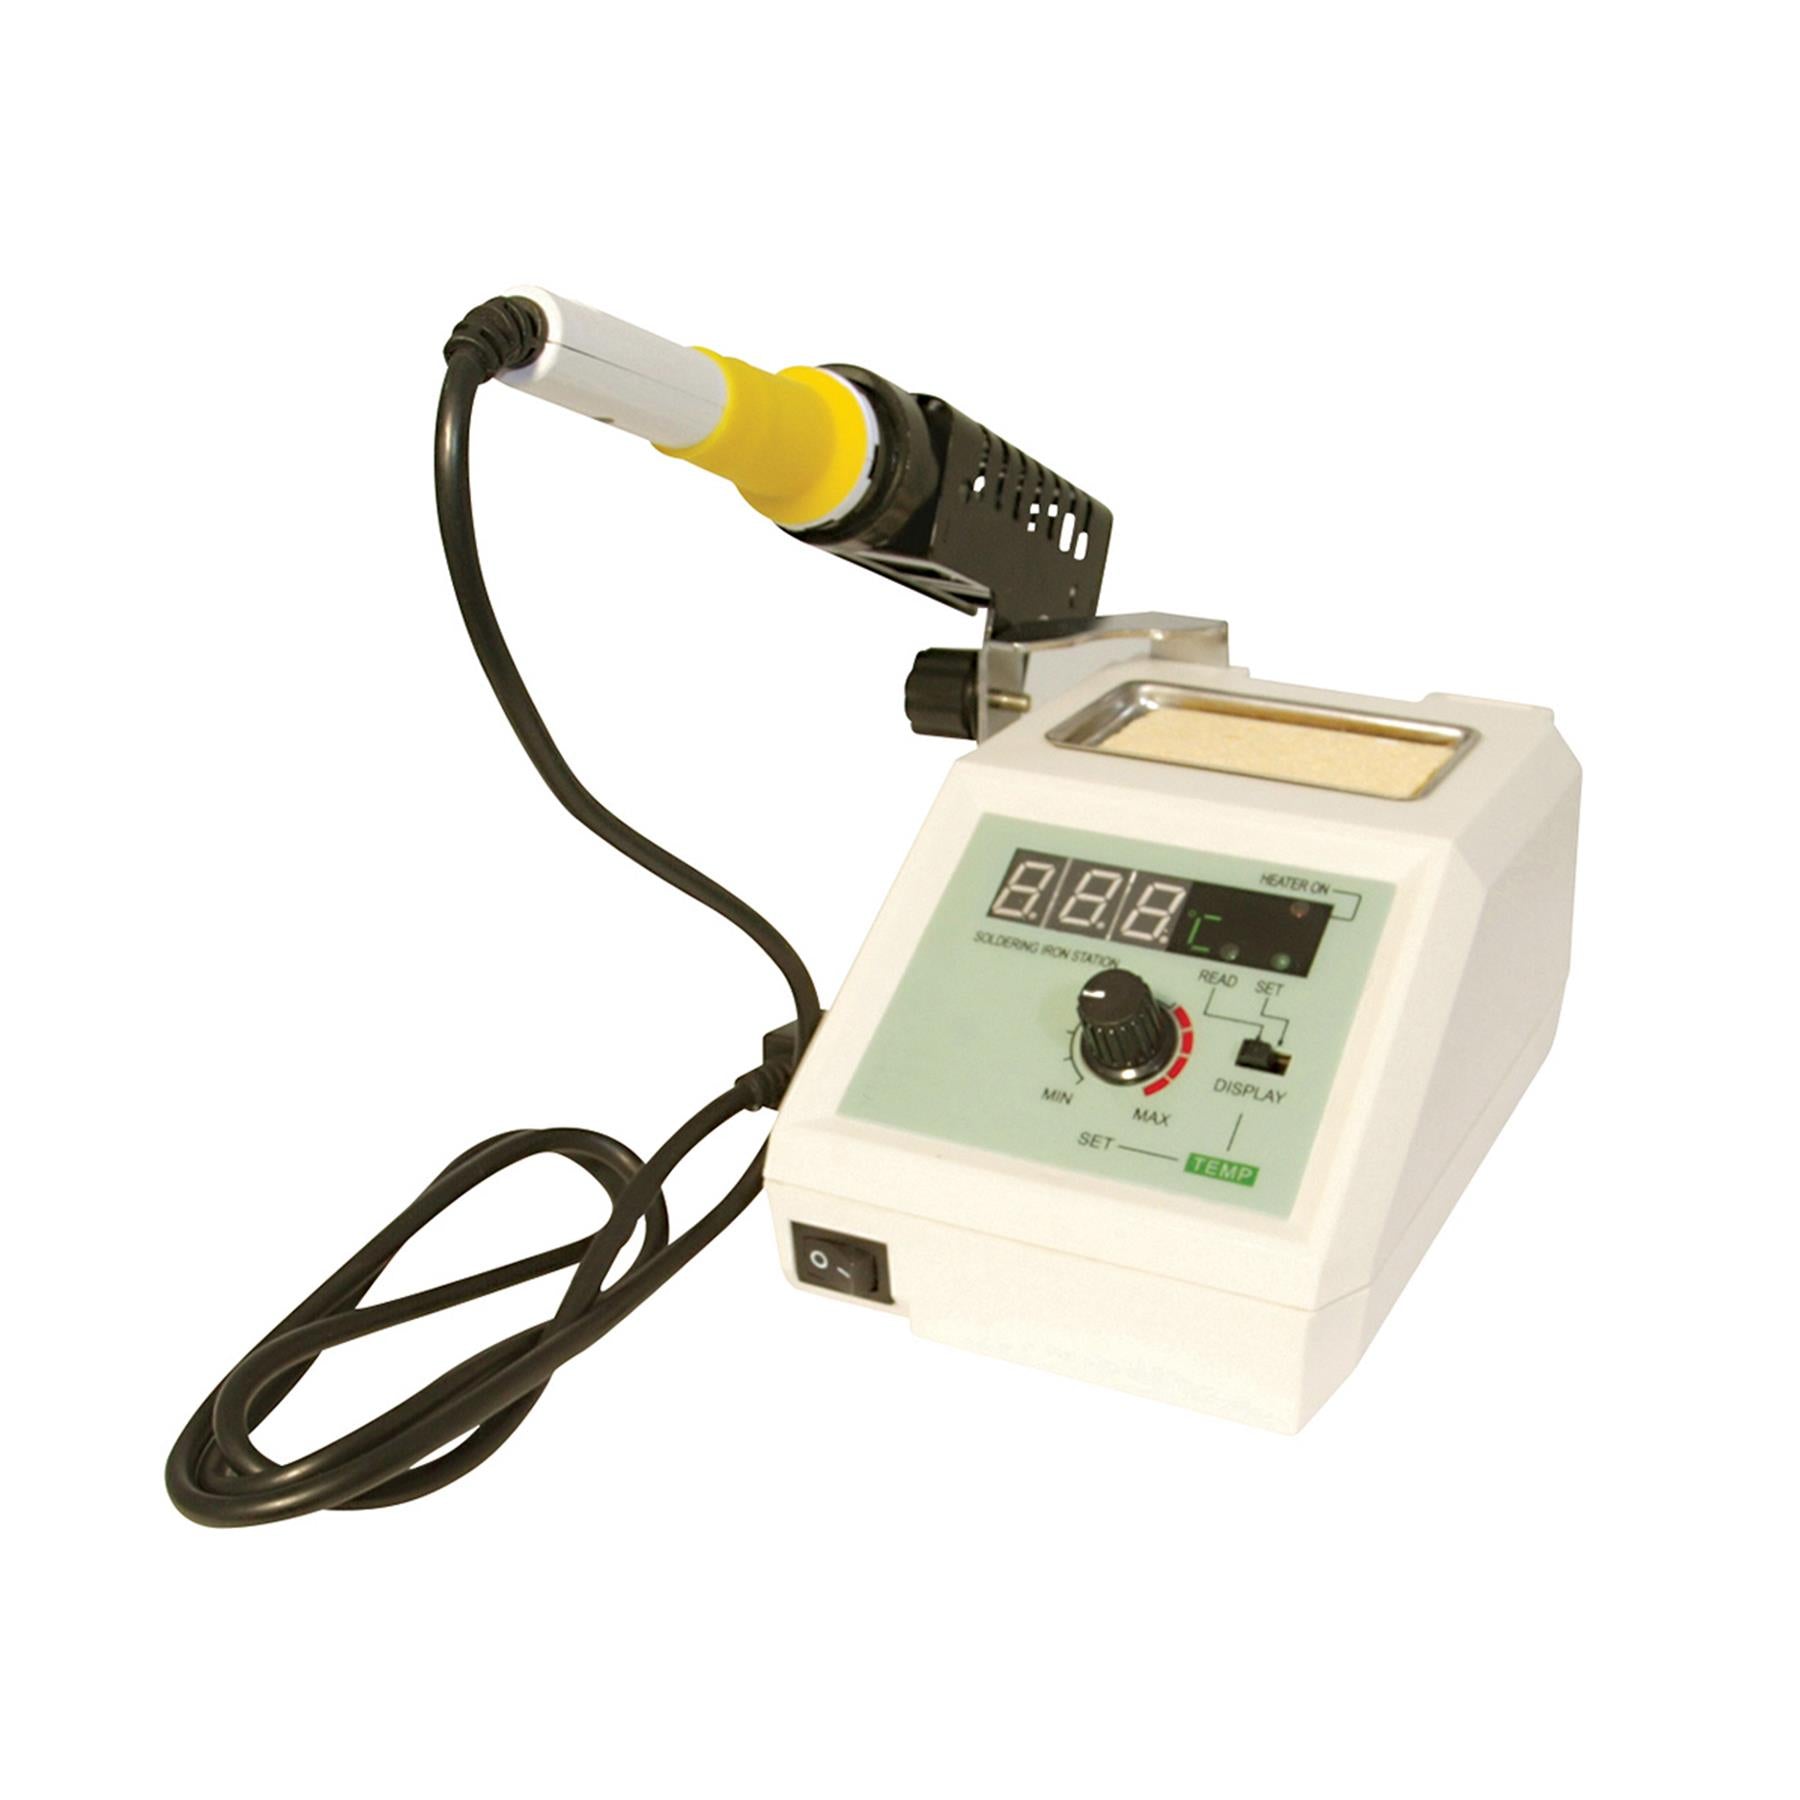 Soldering Station 48W - 48W DIY Tools Electronically Controlled Temperature